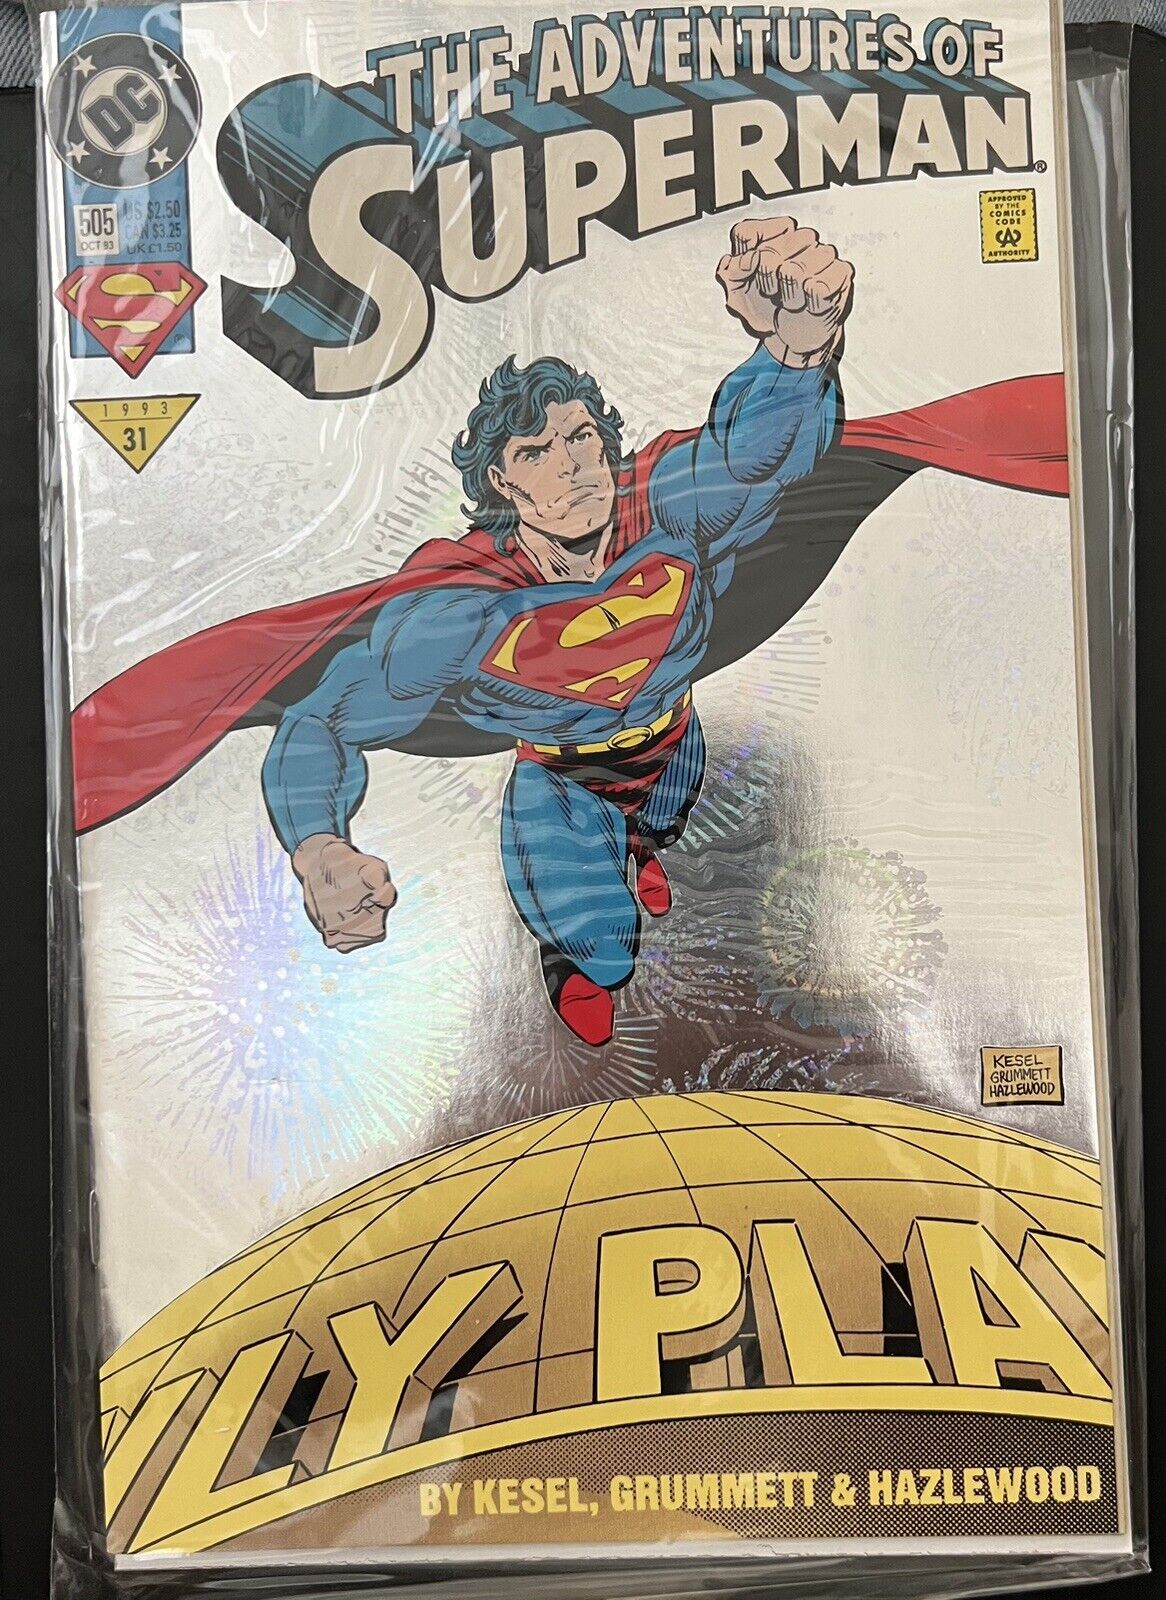 DC Adventures of Superman #505 Reign of The Superman Holo Foil Cover Oct 1993 MT